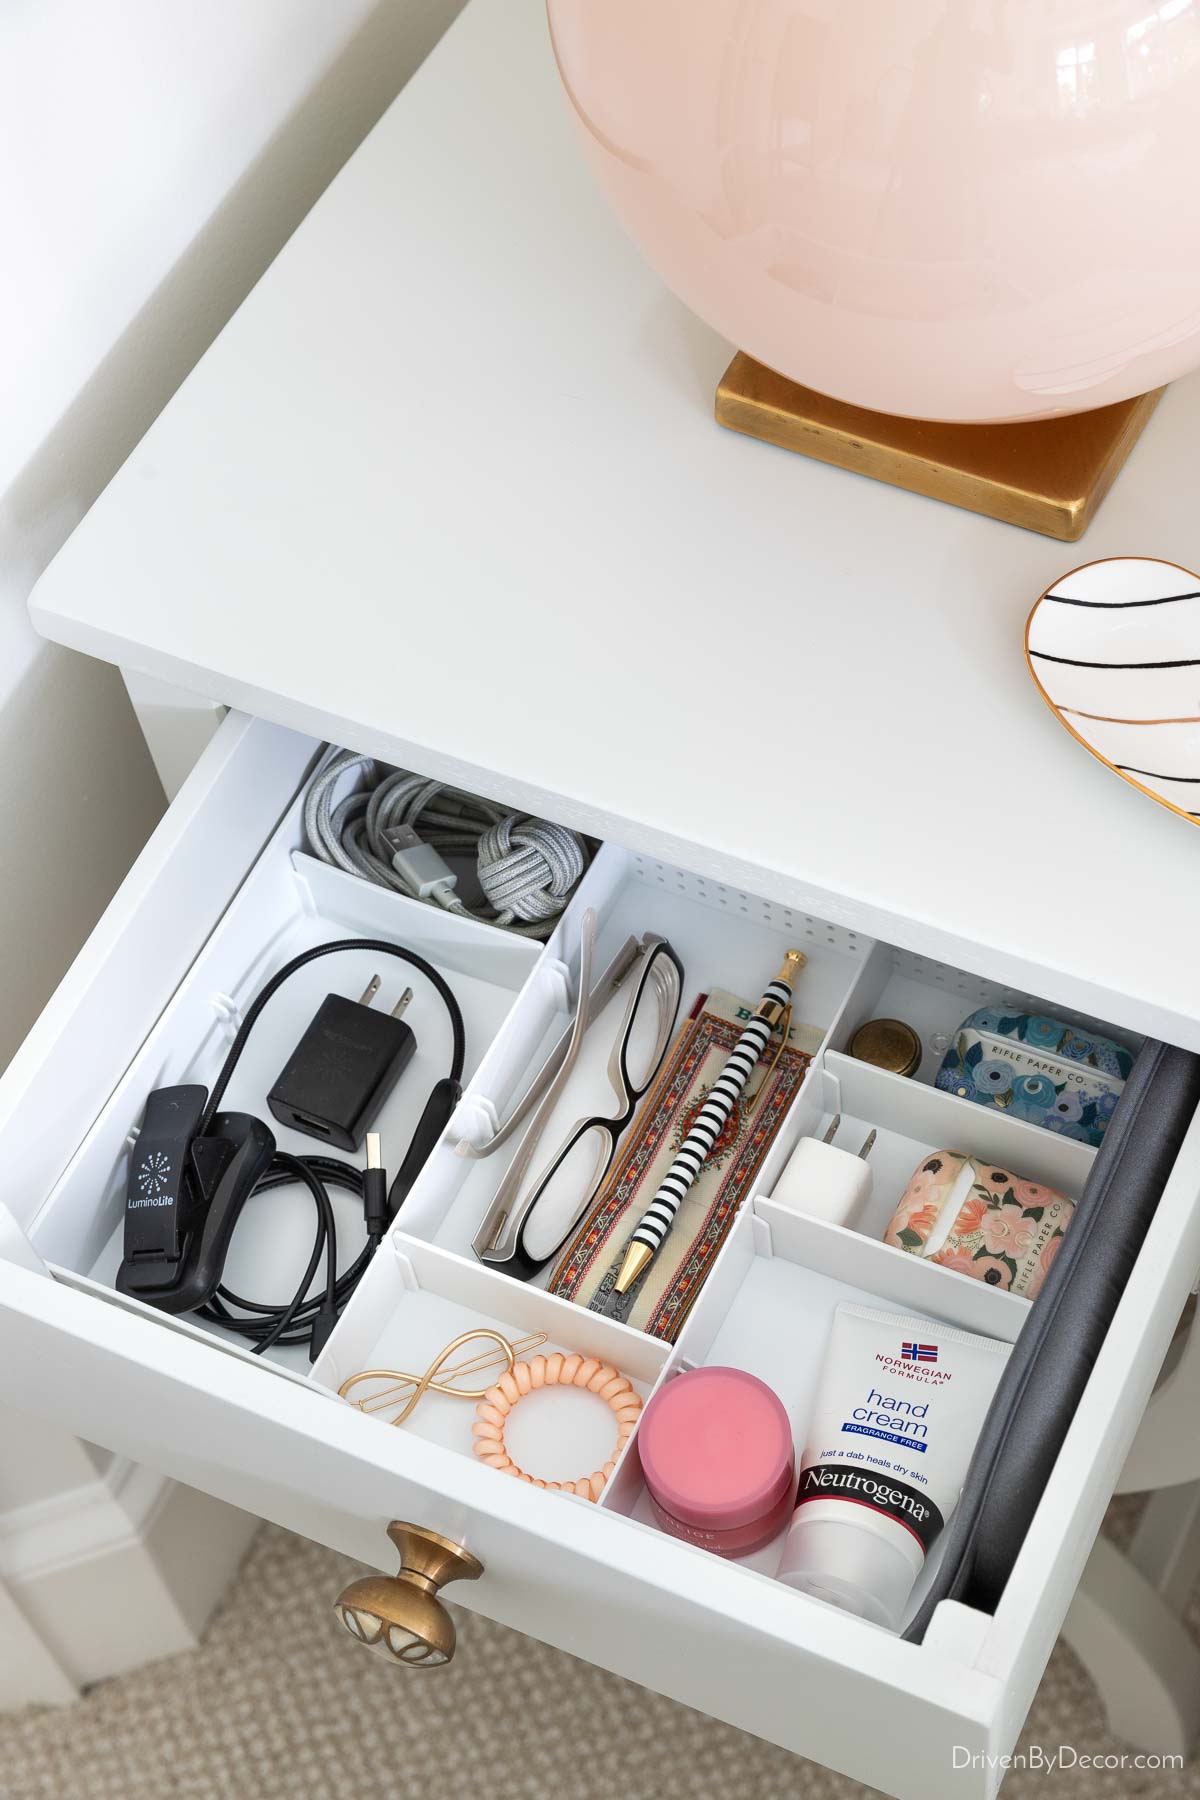 15 Bedroom Organization Ideas to Help Kick the Clutter! - Driven